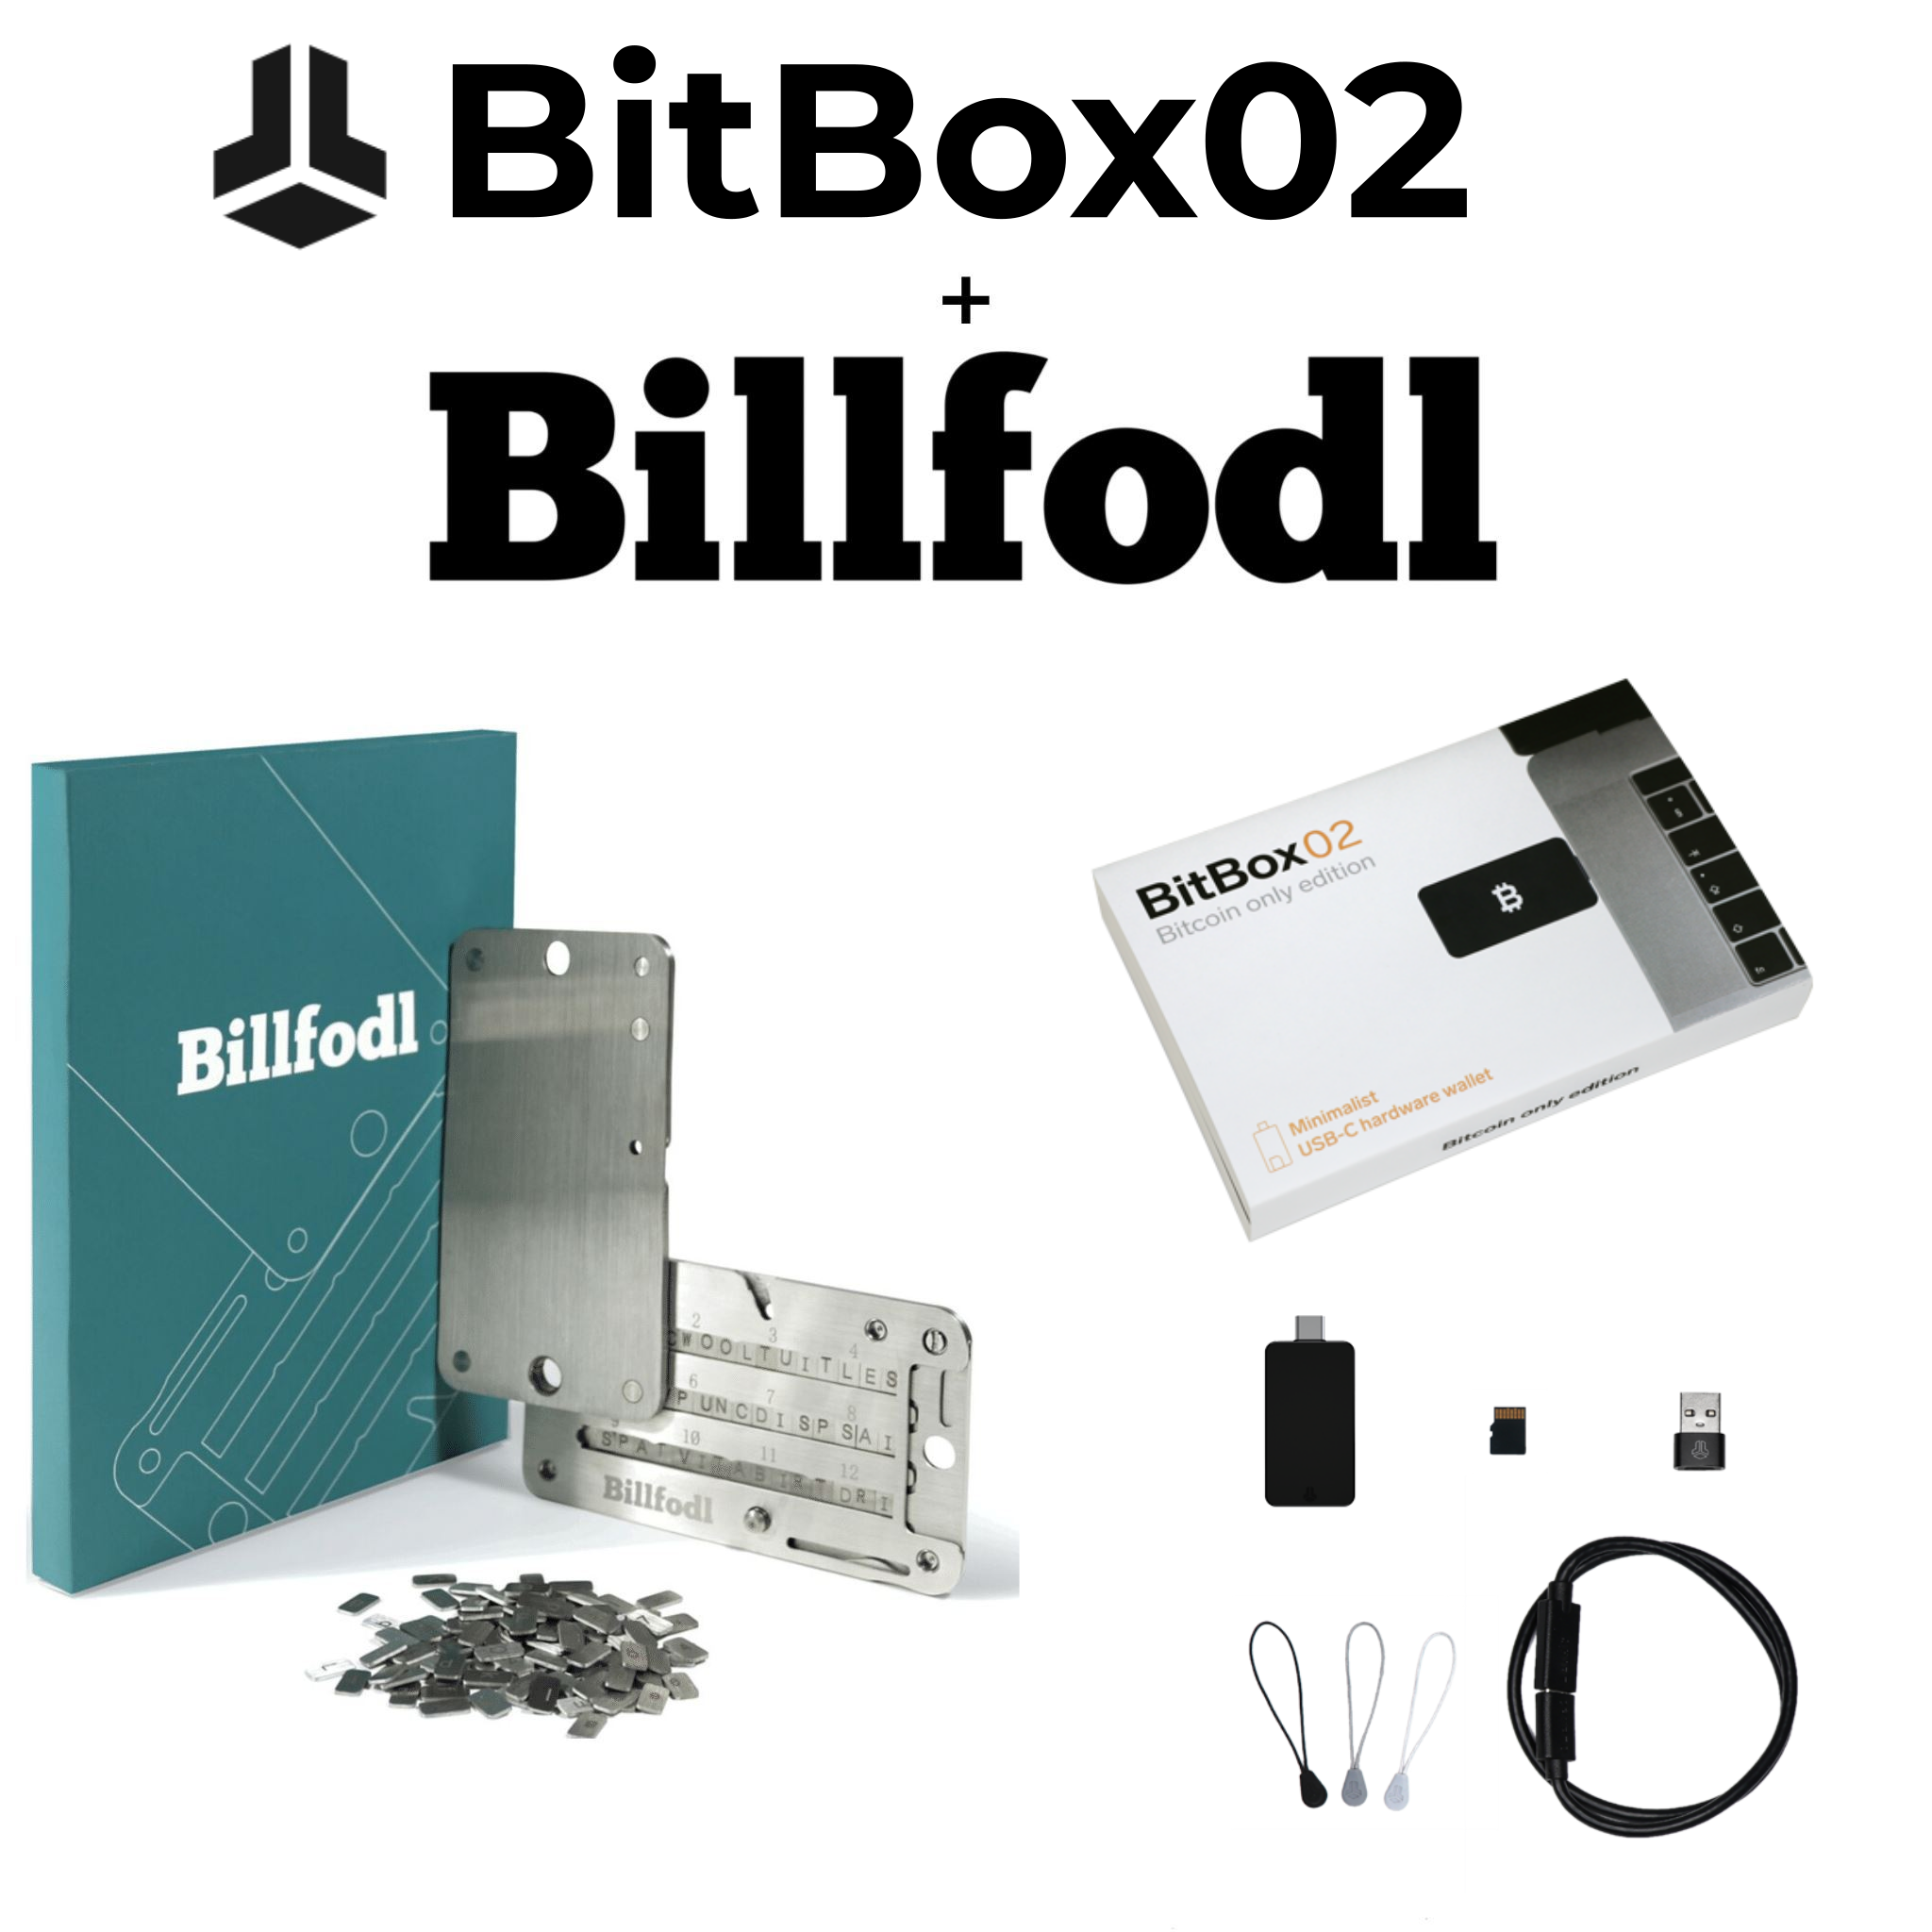 BitBox02 (Bitcoin only) and Billfodl Box Contents